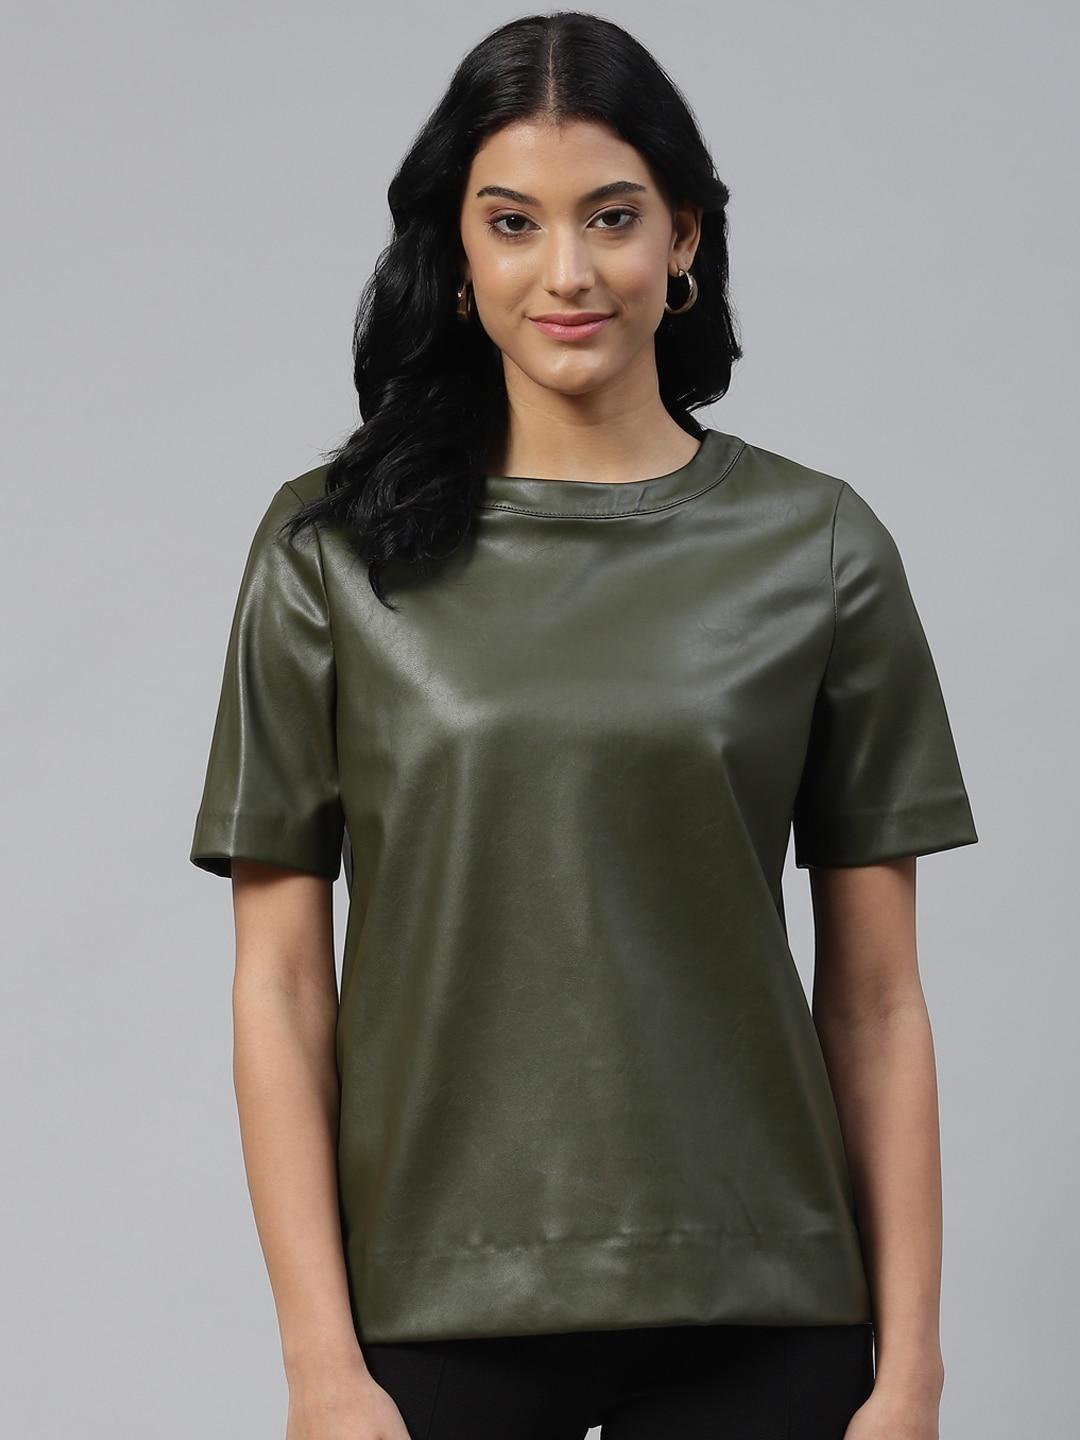 marks & spencer olive green solid faux leather top